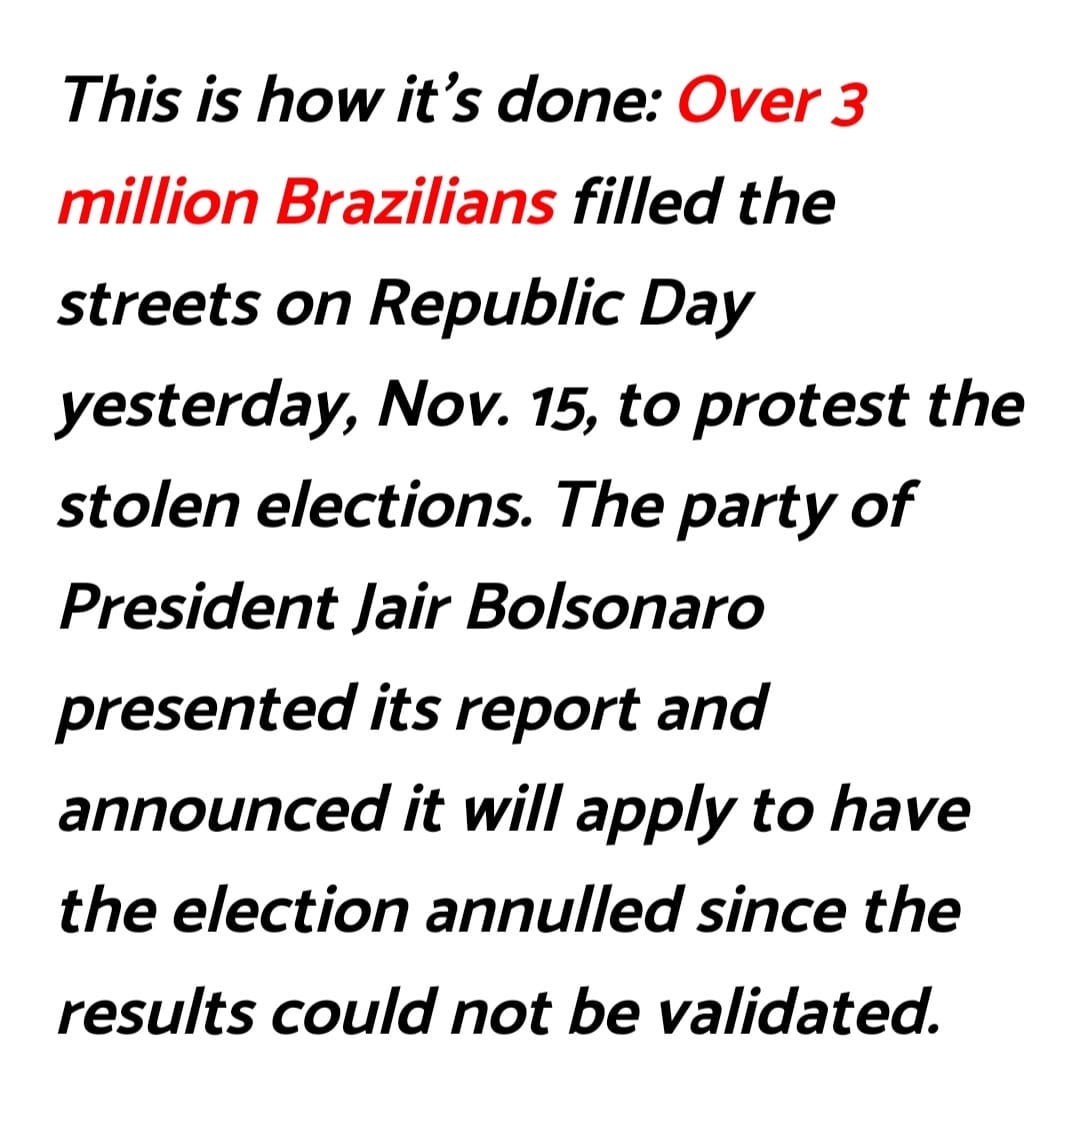 May be an image of text that says 'This is how it's done: Over 3 million Brazilians fillled the streets on Republic Day yesterday, Nov. 15, to protest the stolen elections. The party of President Jair Bolsonaro presented its report and announced it will apply to have the election annulled since the results could not be validated.'